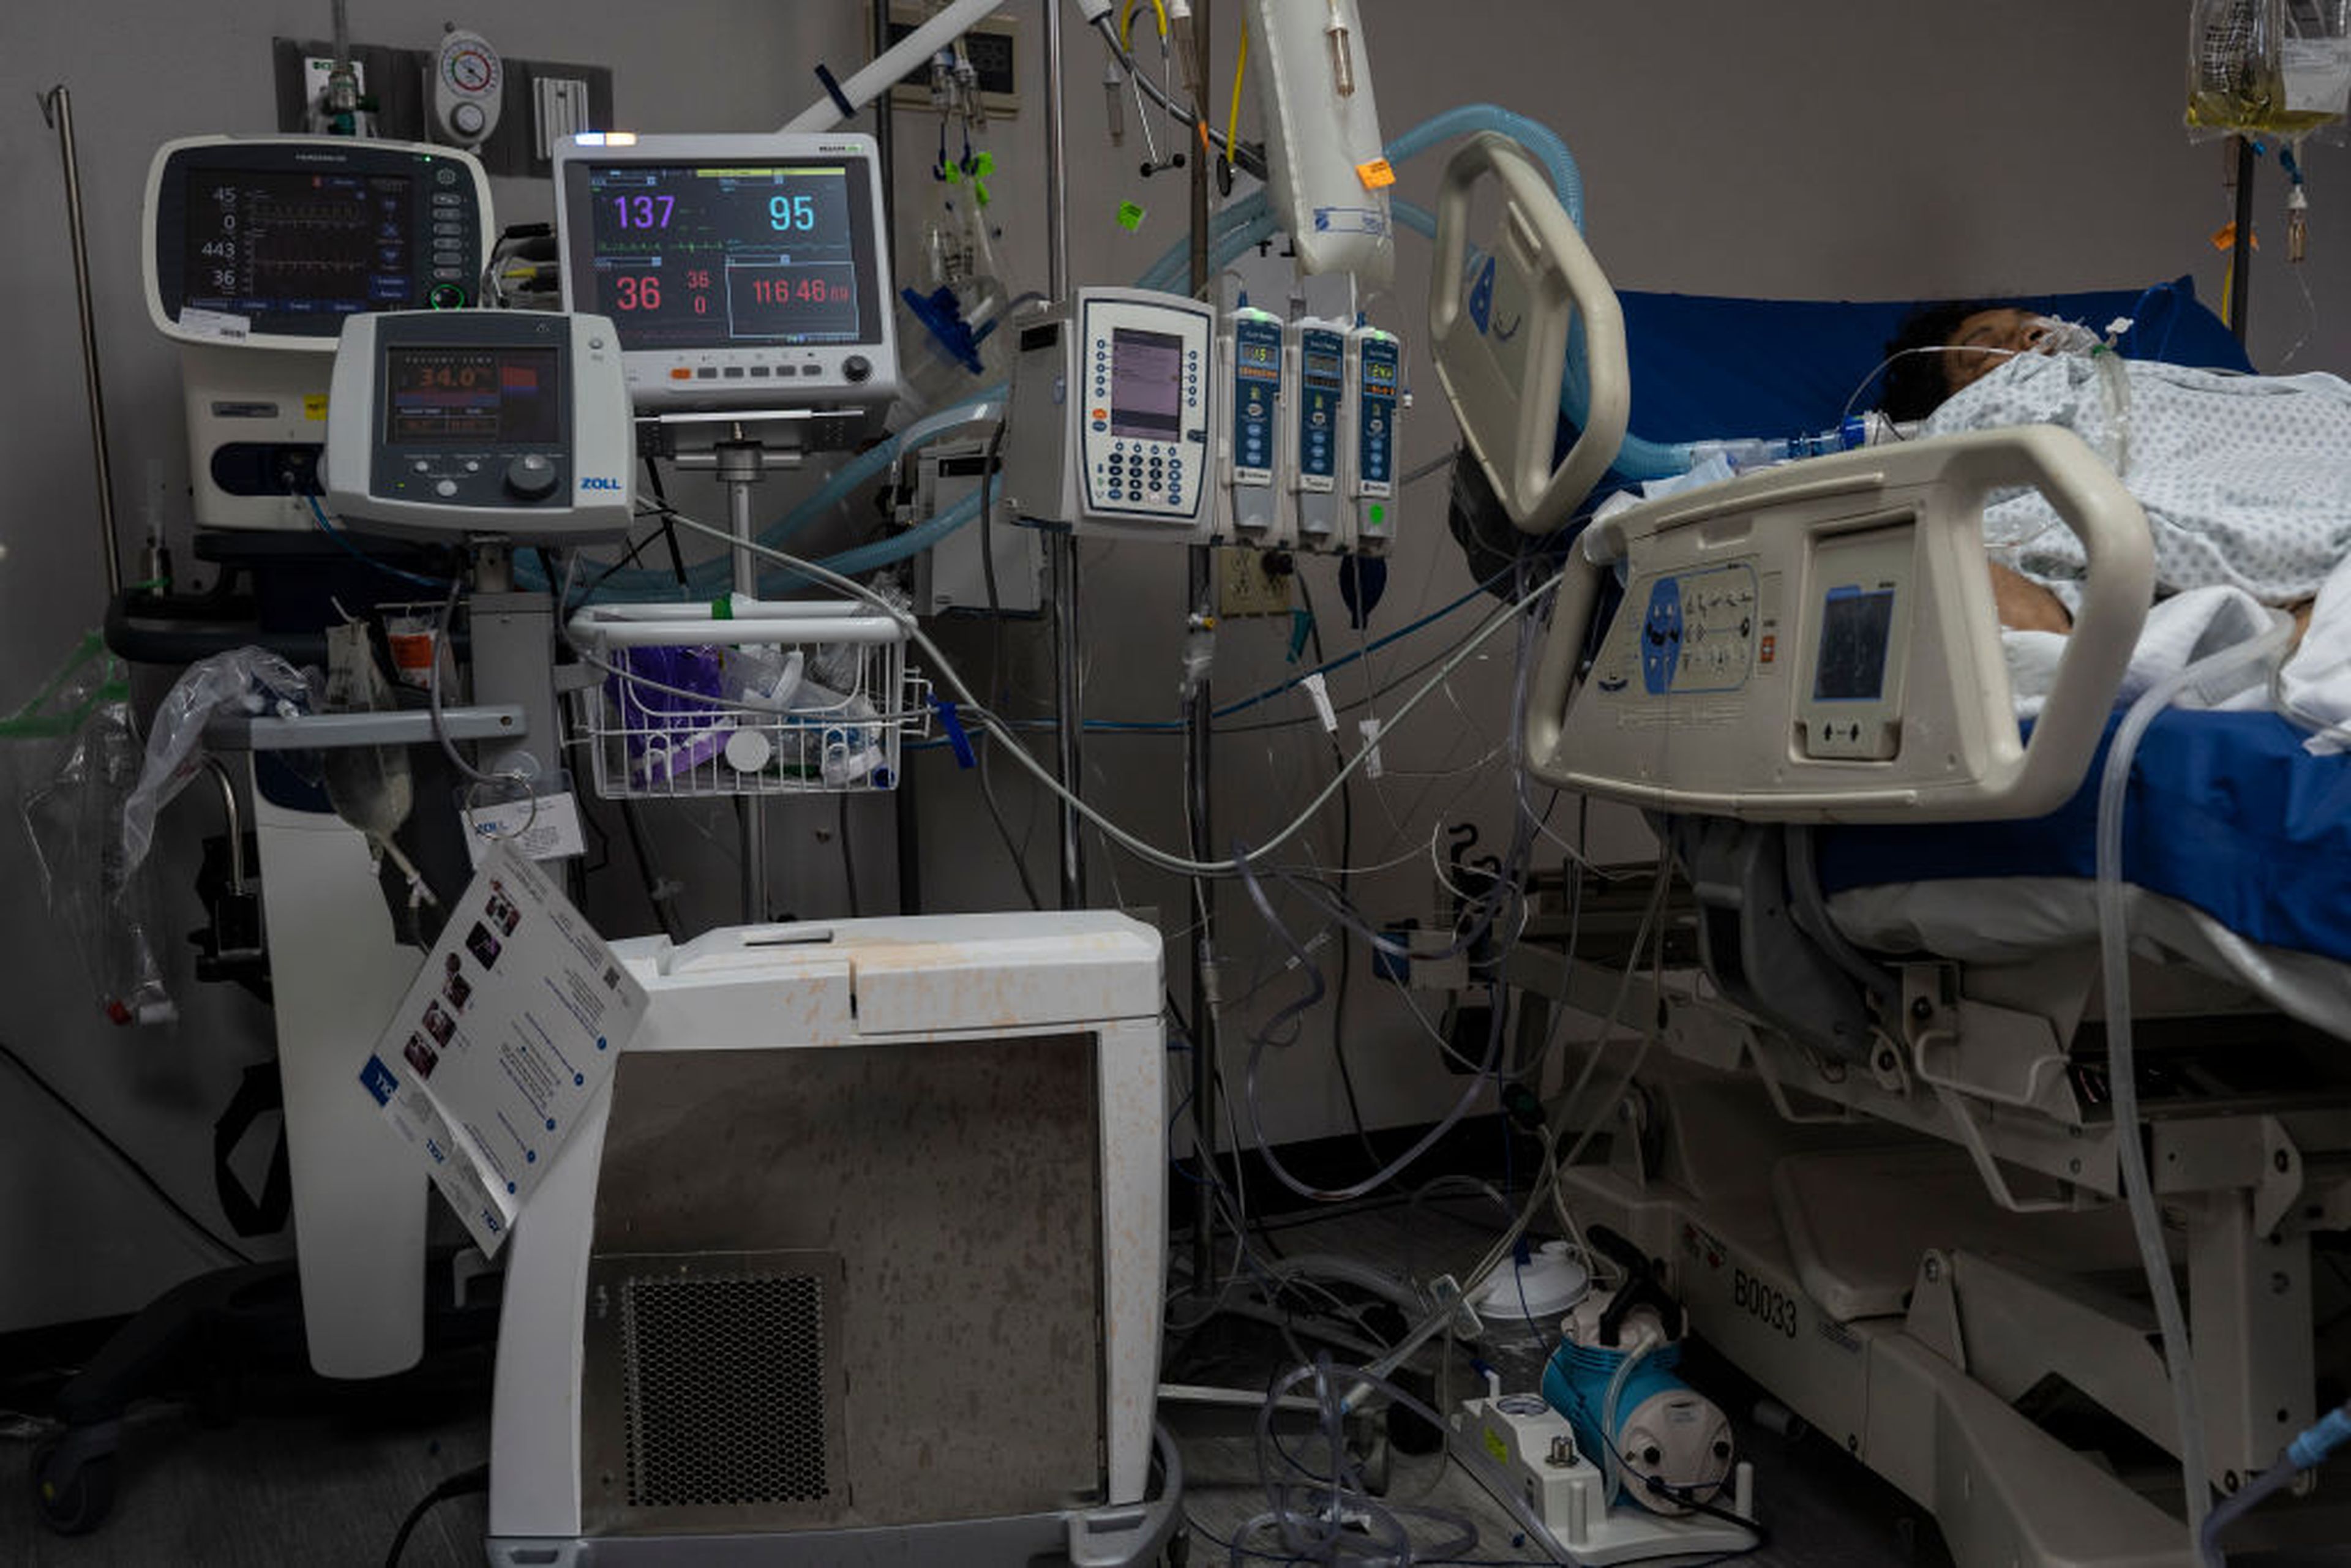 As each hospital has an average of 20,000 device, each vulnerability poses a patient safety risk. The sector&#8217;s rapid adoption of SBOM use to improve device security, could serve as a model for other sectors. (EDITORIAL USE ONLY) (Photo by Go Nakamura/Getty Images)